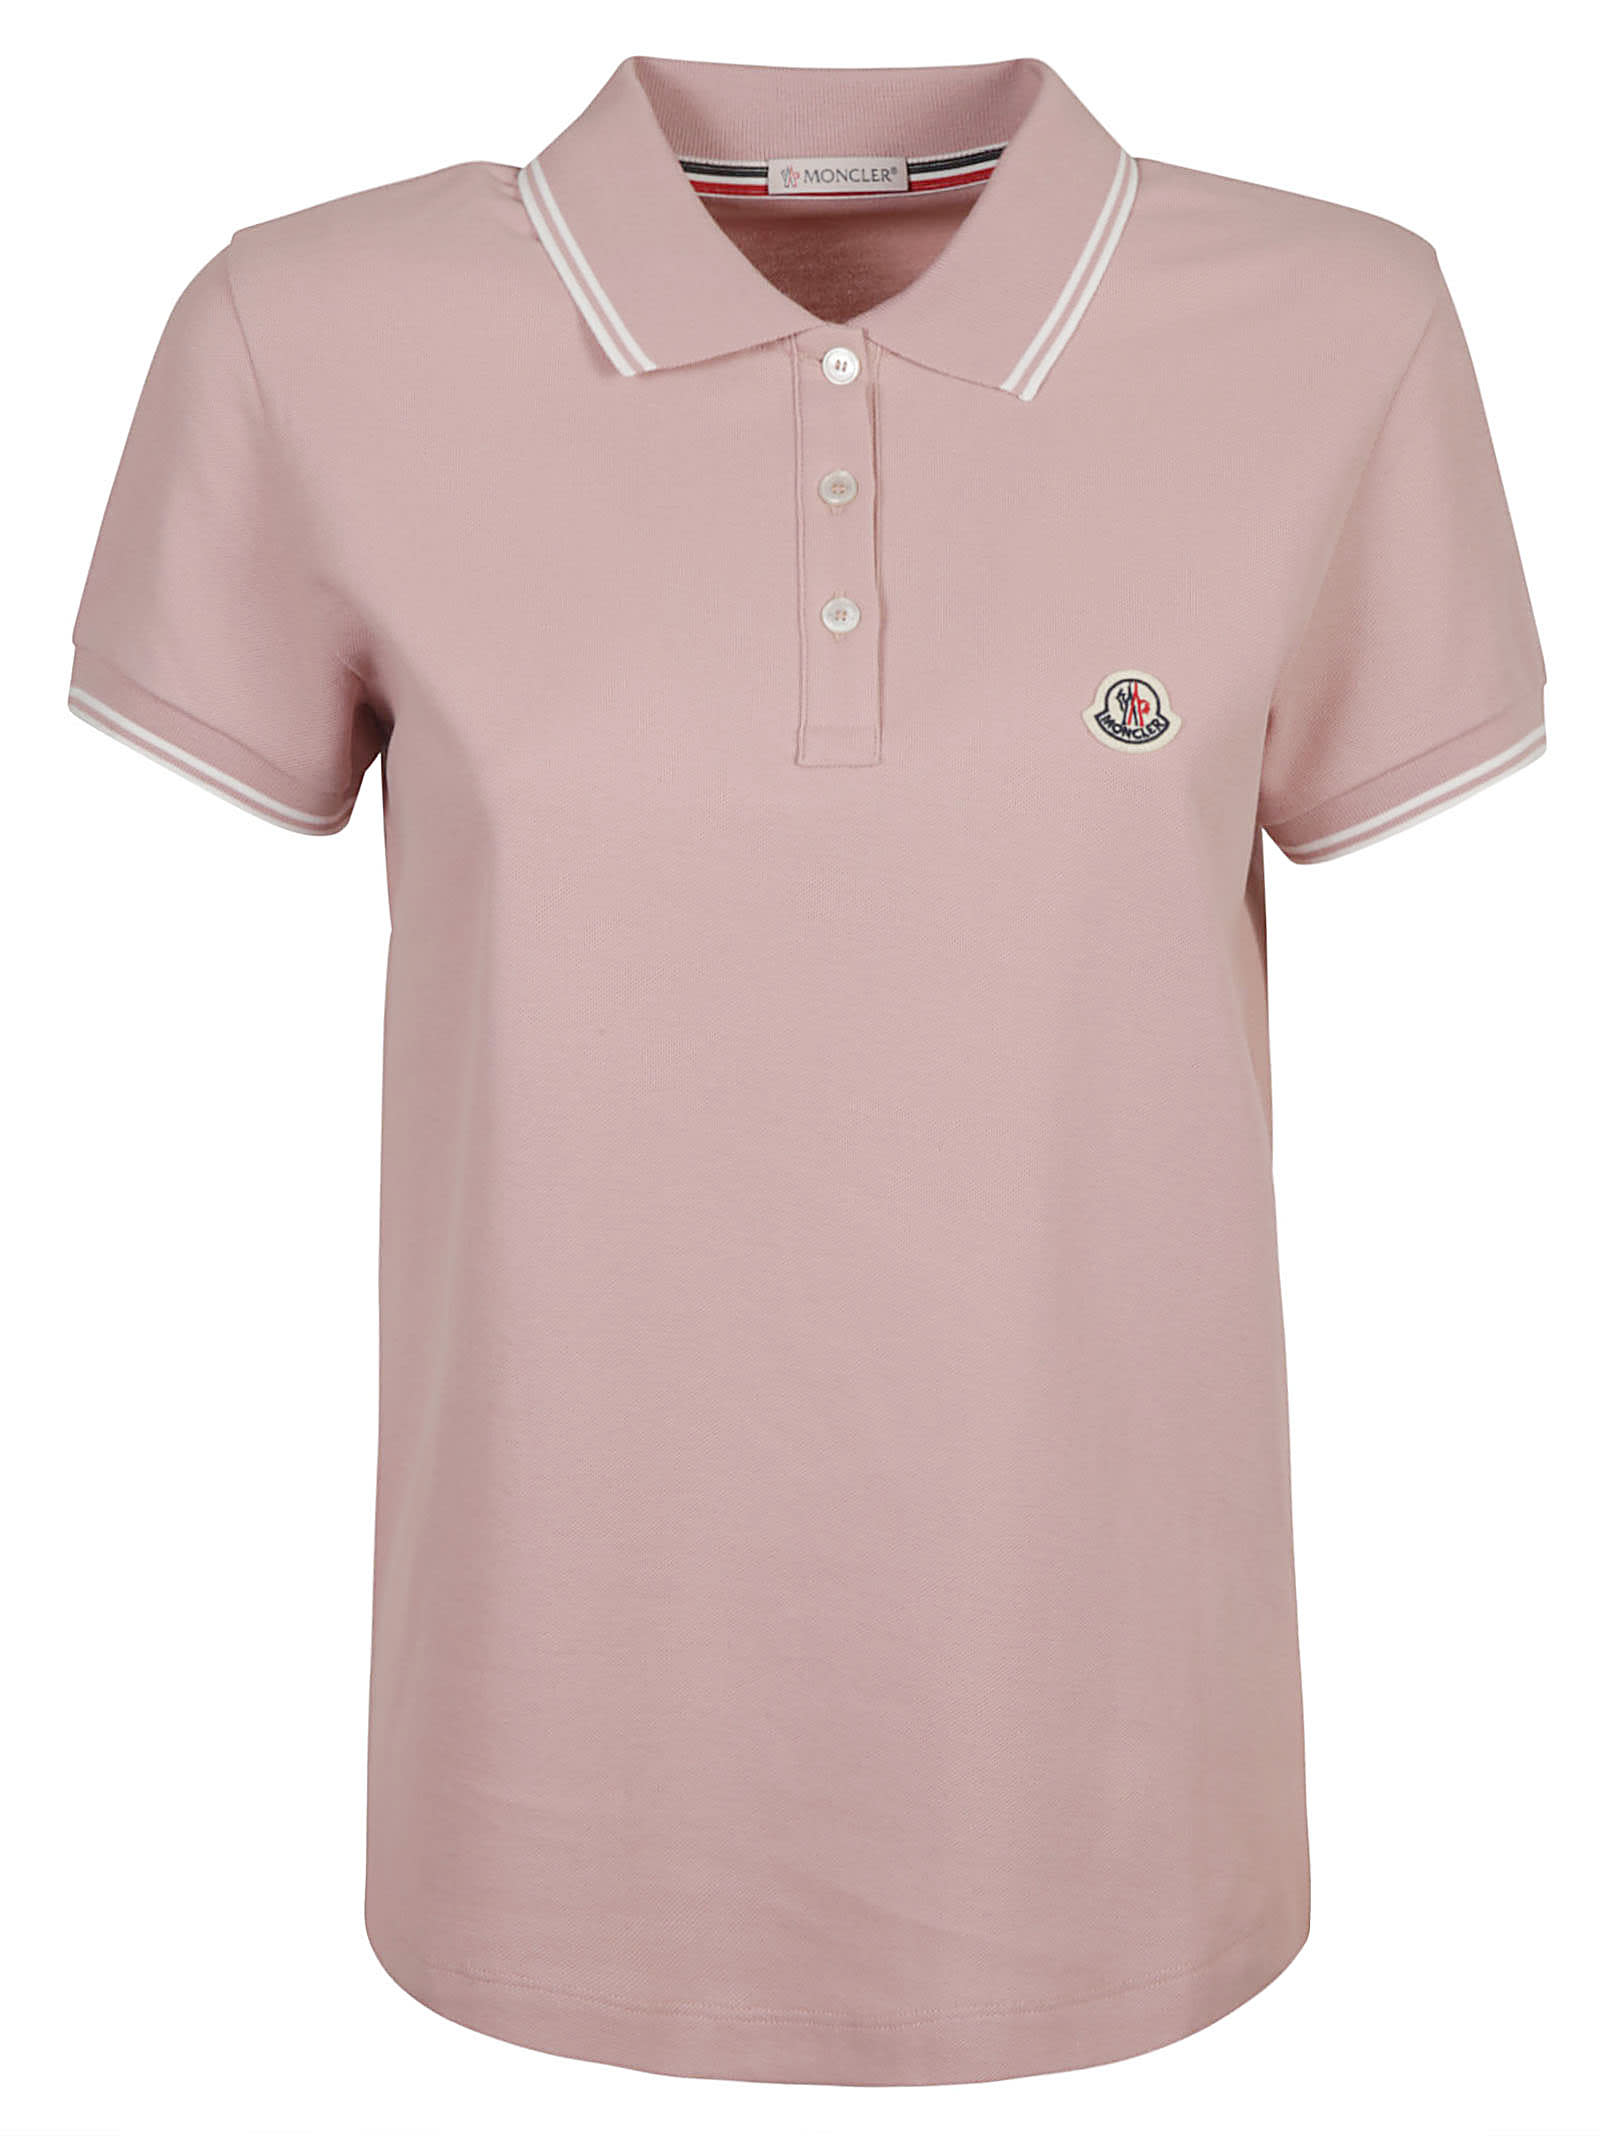 MONCLER STRIPE TRIMMED LOGO PATCHED POLO SHIRT,11823159